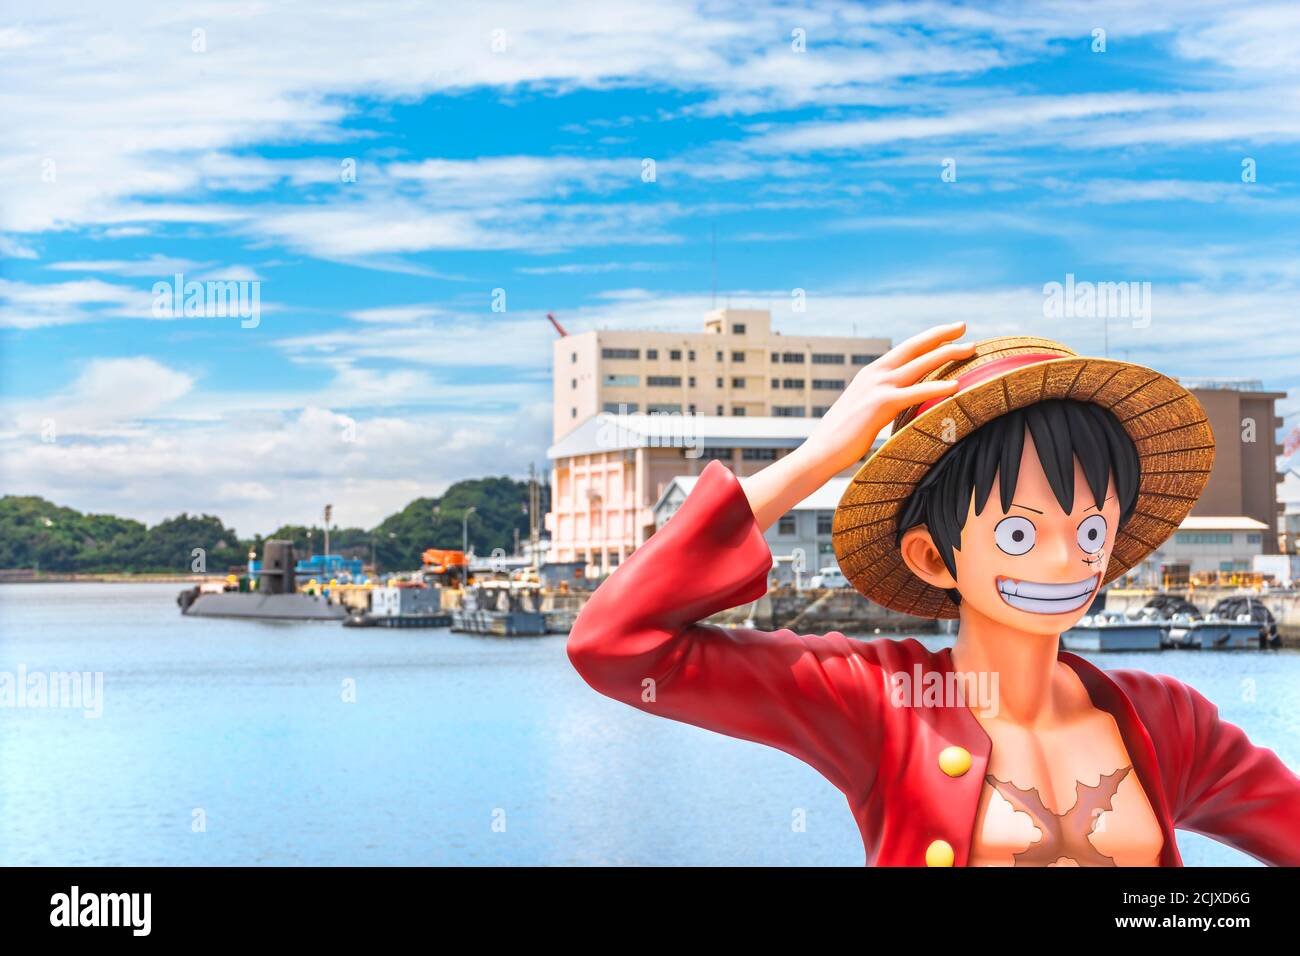 yokosuka, japan - july 19 2020: Close-up on the bust of the real size figurine of the hero Monkey D. Luffy from the manga One Piece by Eiichiro Oda on Stock Photo